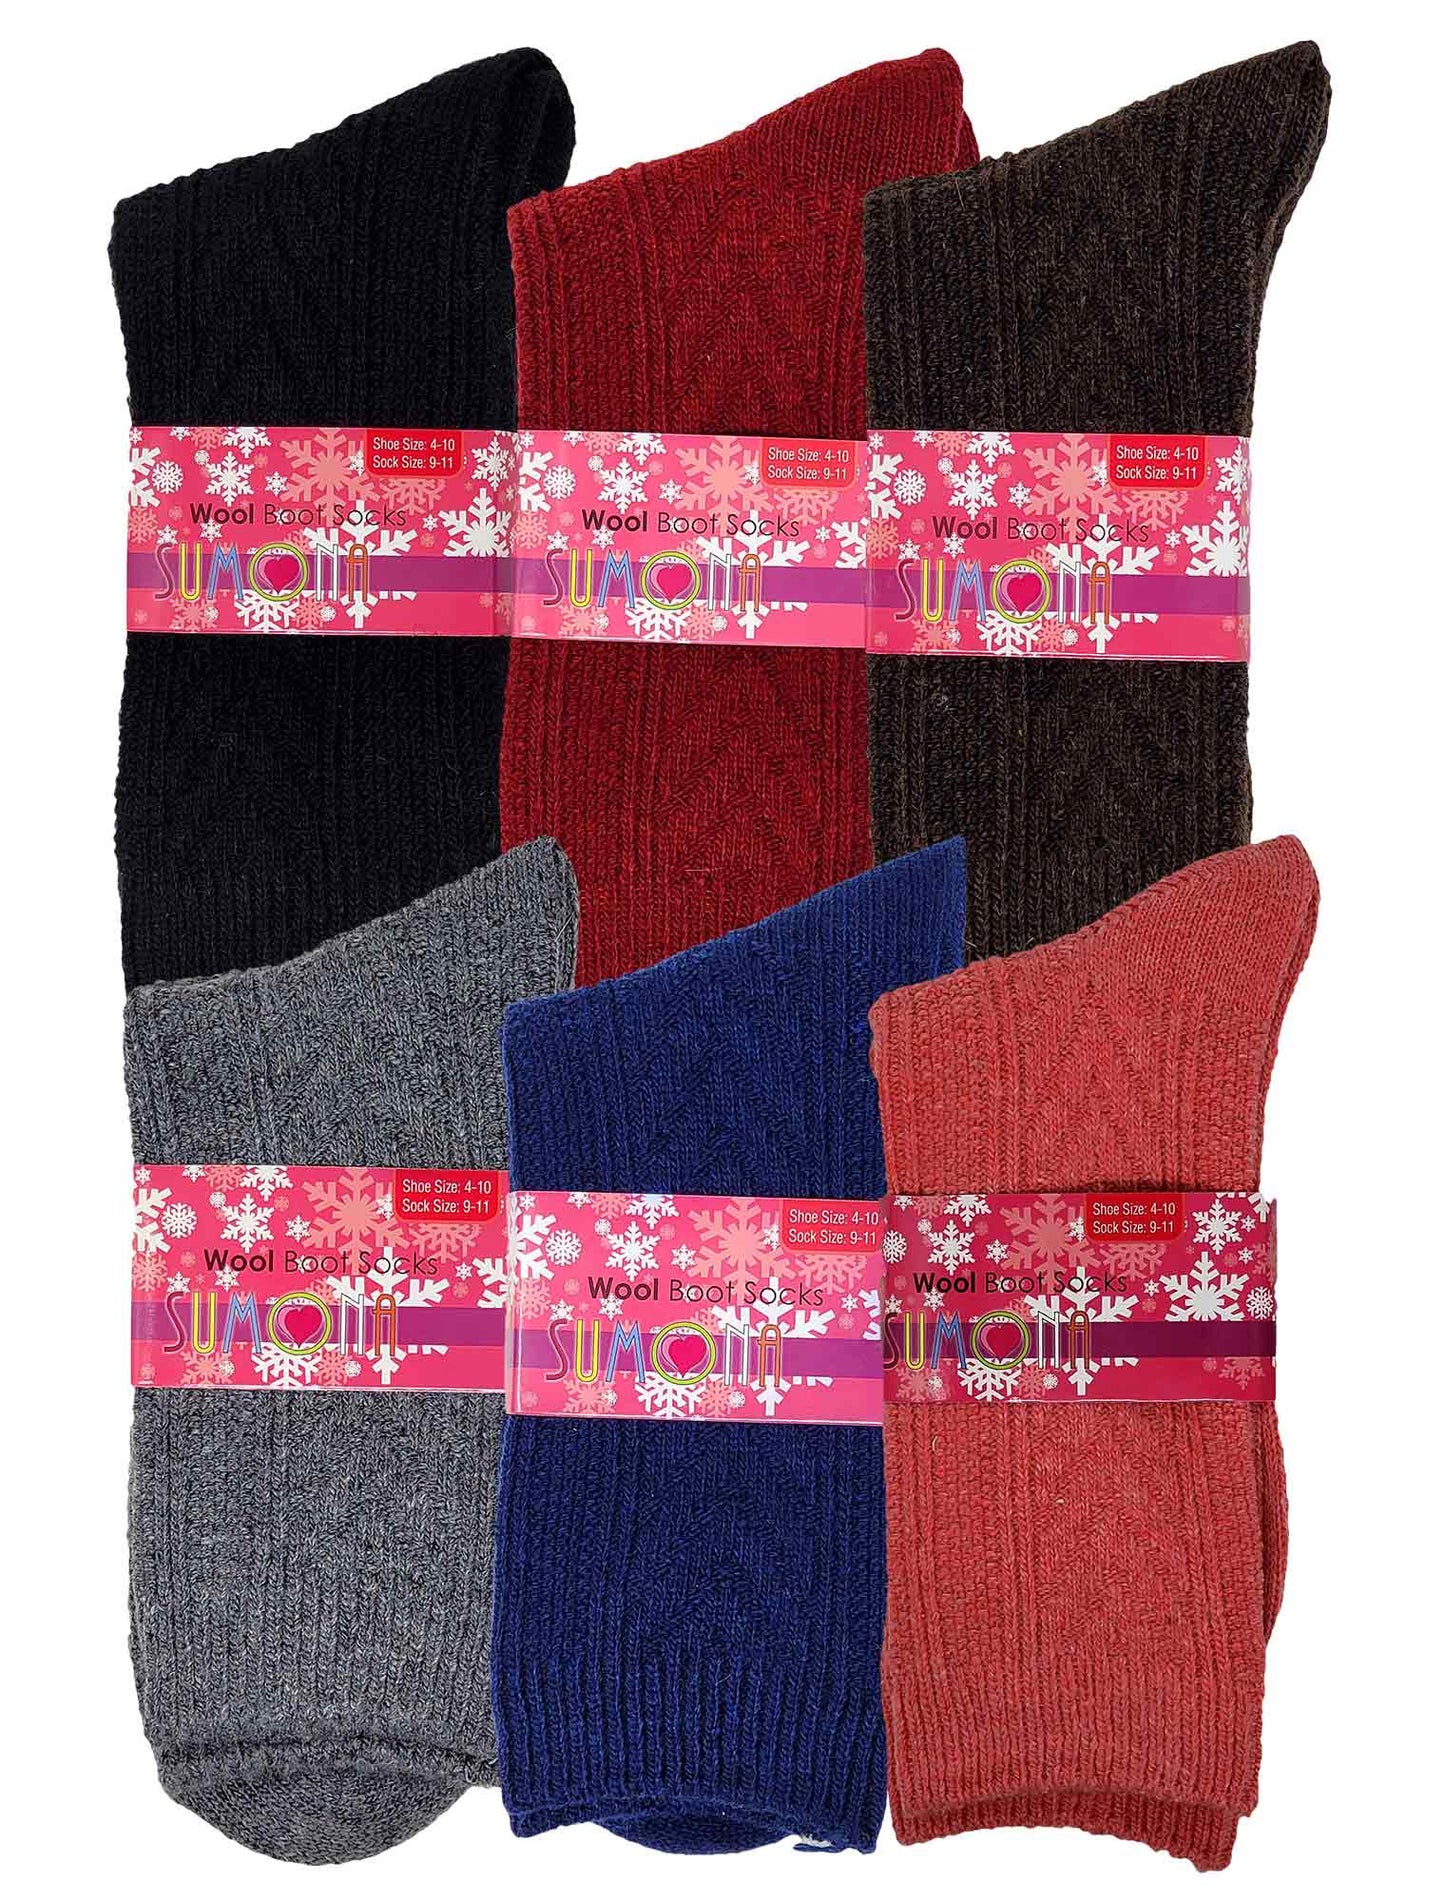 Crew Boot Socks | Wool Blend Cable Knit Assorted | Womens (6 pairs)